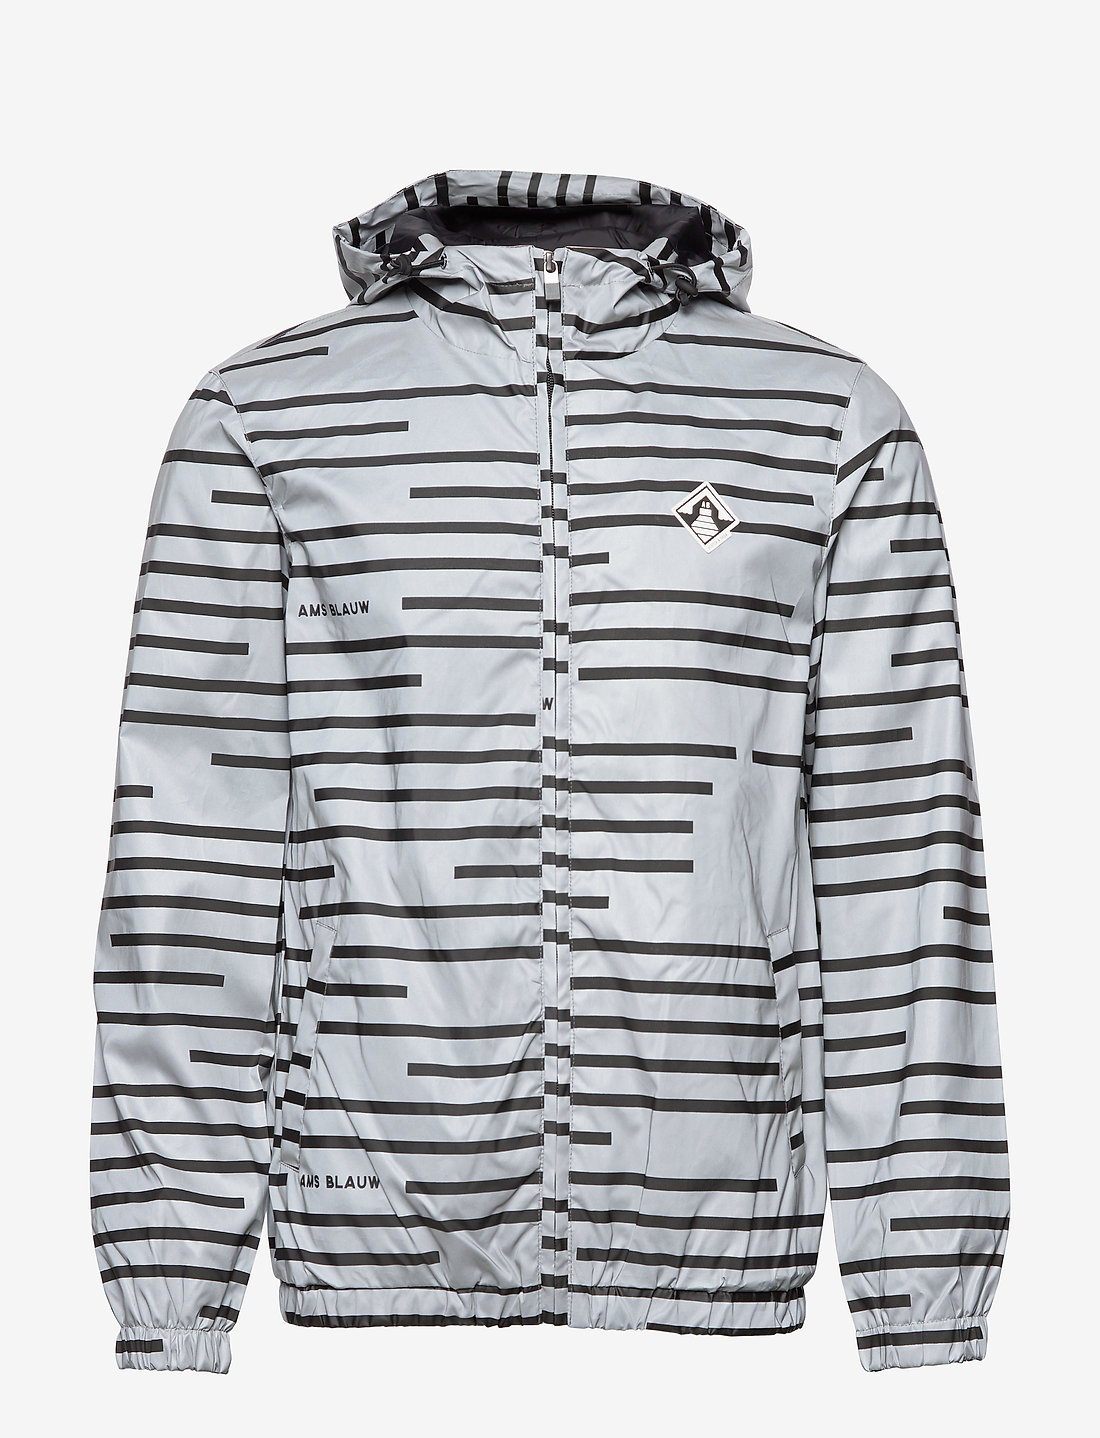 Scotch & Soda Reflective Windbreaker Jacket - 169.95 €. Buy Light Jackets  from Scotch & Soda online at . Fast delivery and easy returns